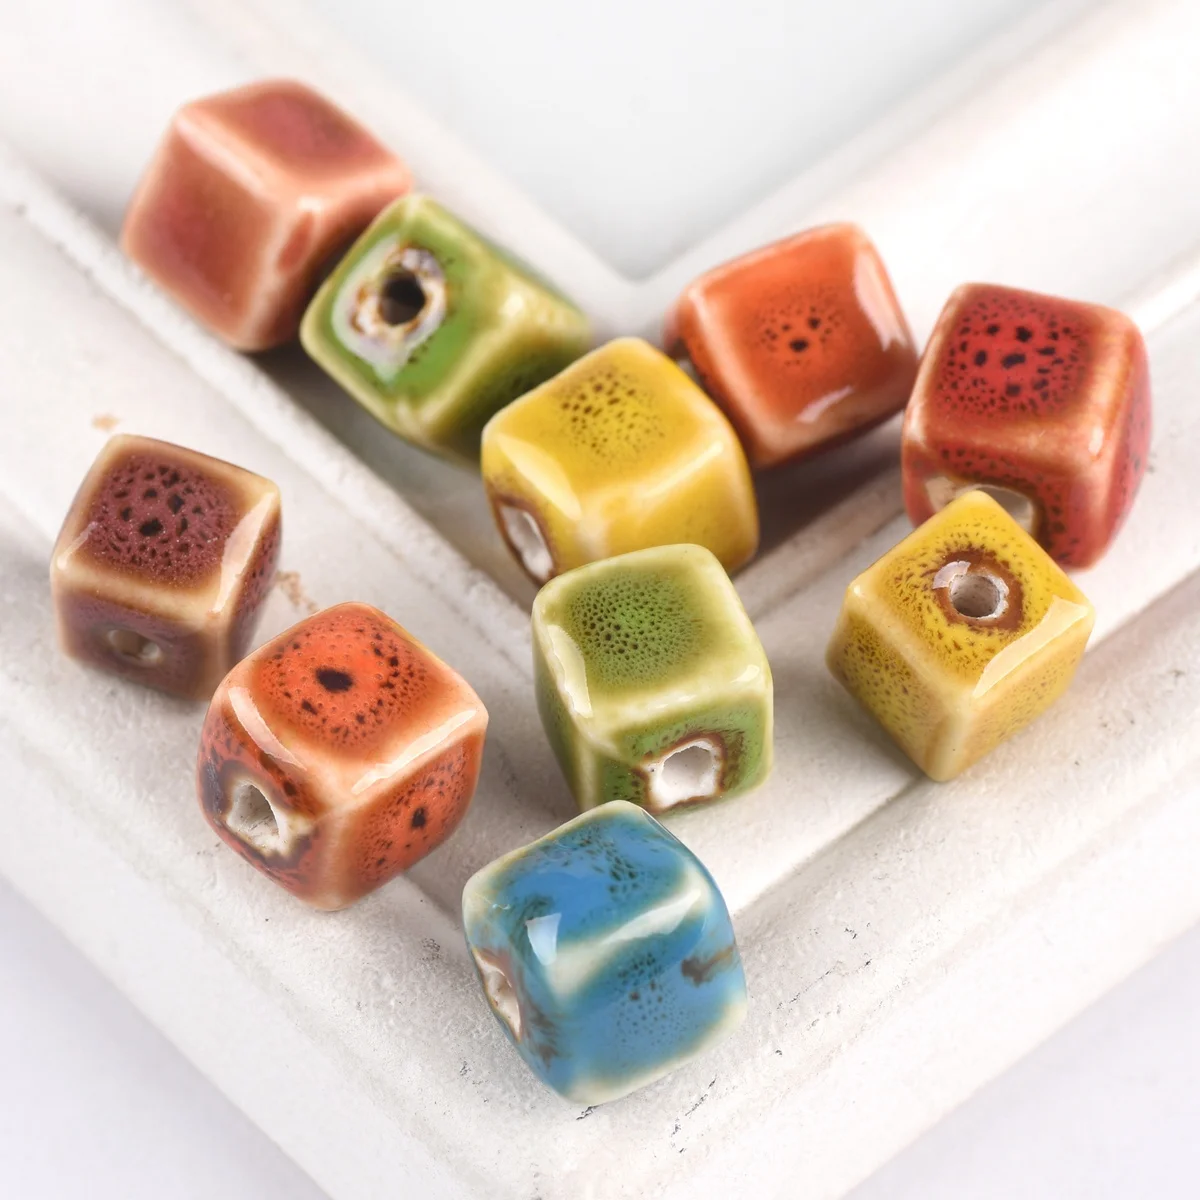 

10pcs Cube Shape 10mm Handmade Fancy Glaze Ceramic Porcelain Loose Spacer Beads lot for Jewelry Making DIY Crafts Findings